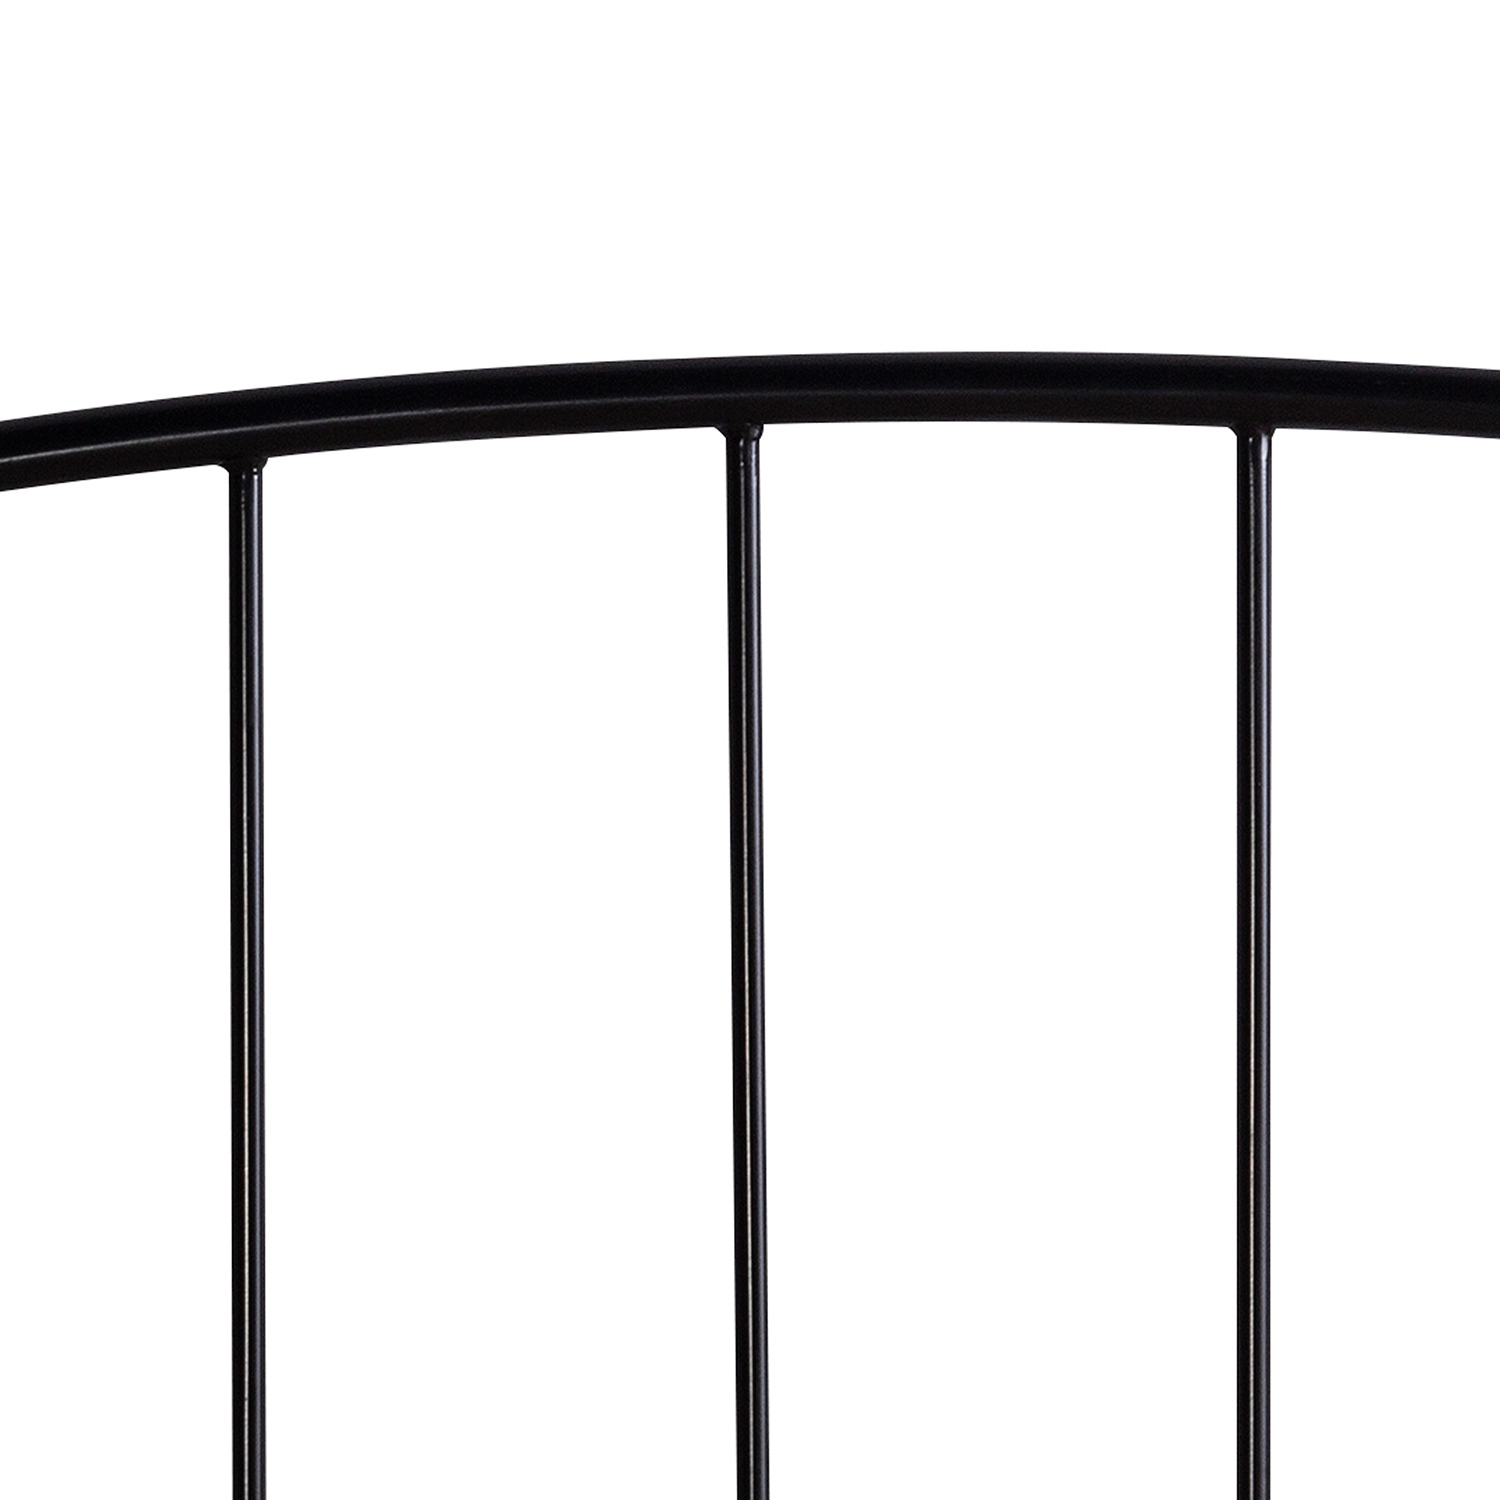 Hillsdale Tolland Metal Headboard with Arched Spindle Design - Black